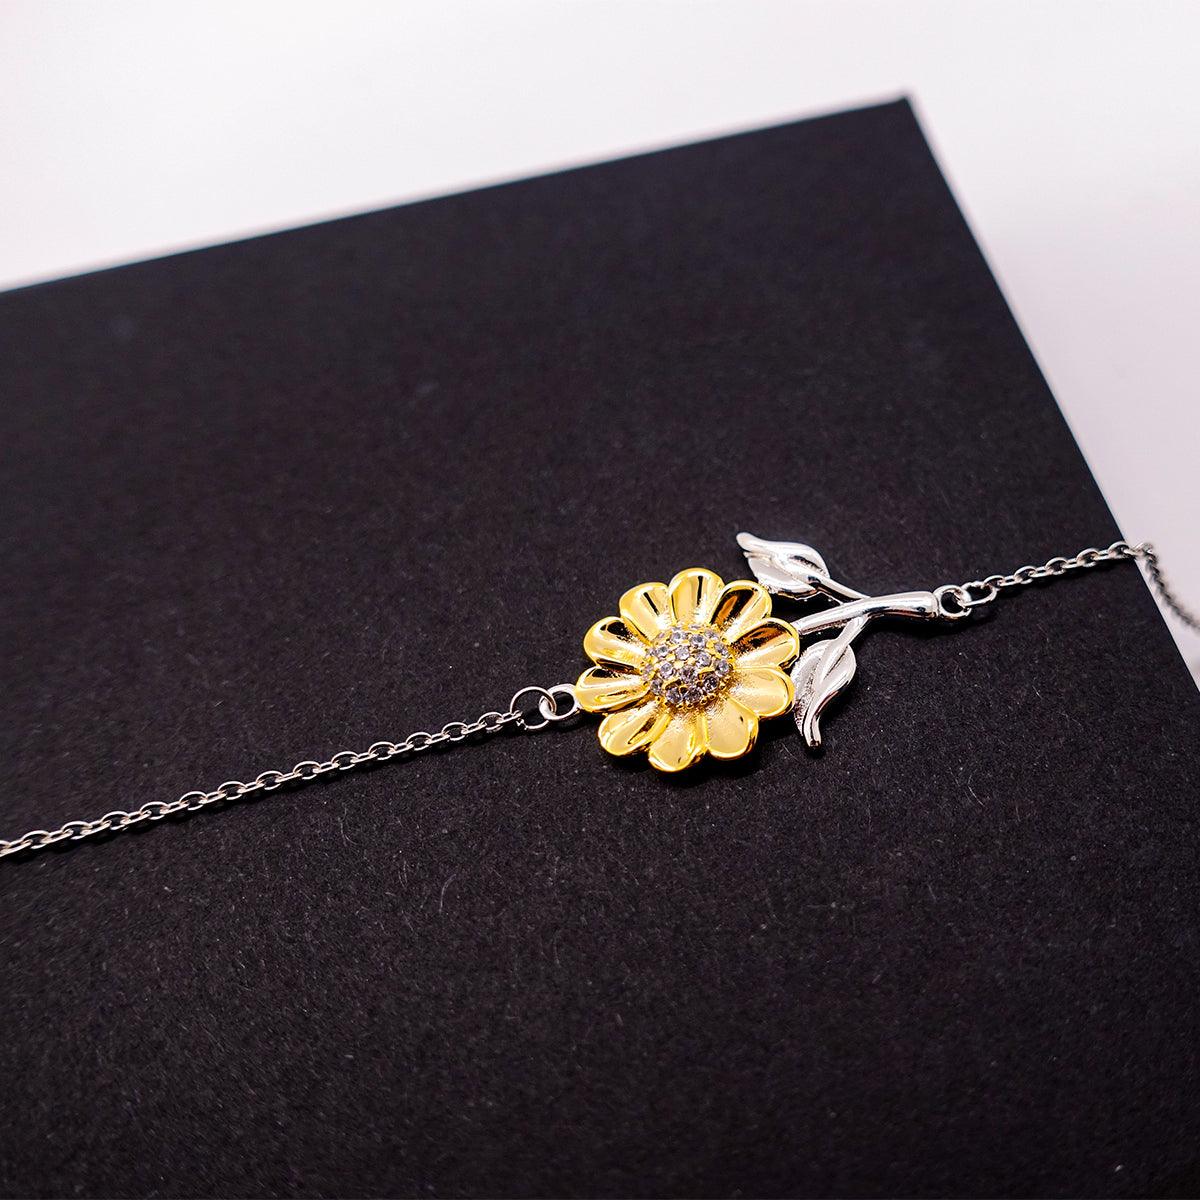 Phlebotomist Sunflower Bracelet - Thanks for being who you are - Birthday Christmas Jewelry Gifts Coworkers Colleague Boss - Mallard Moon Gift Shop